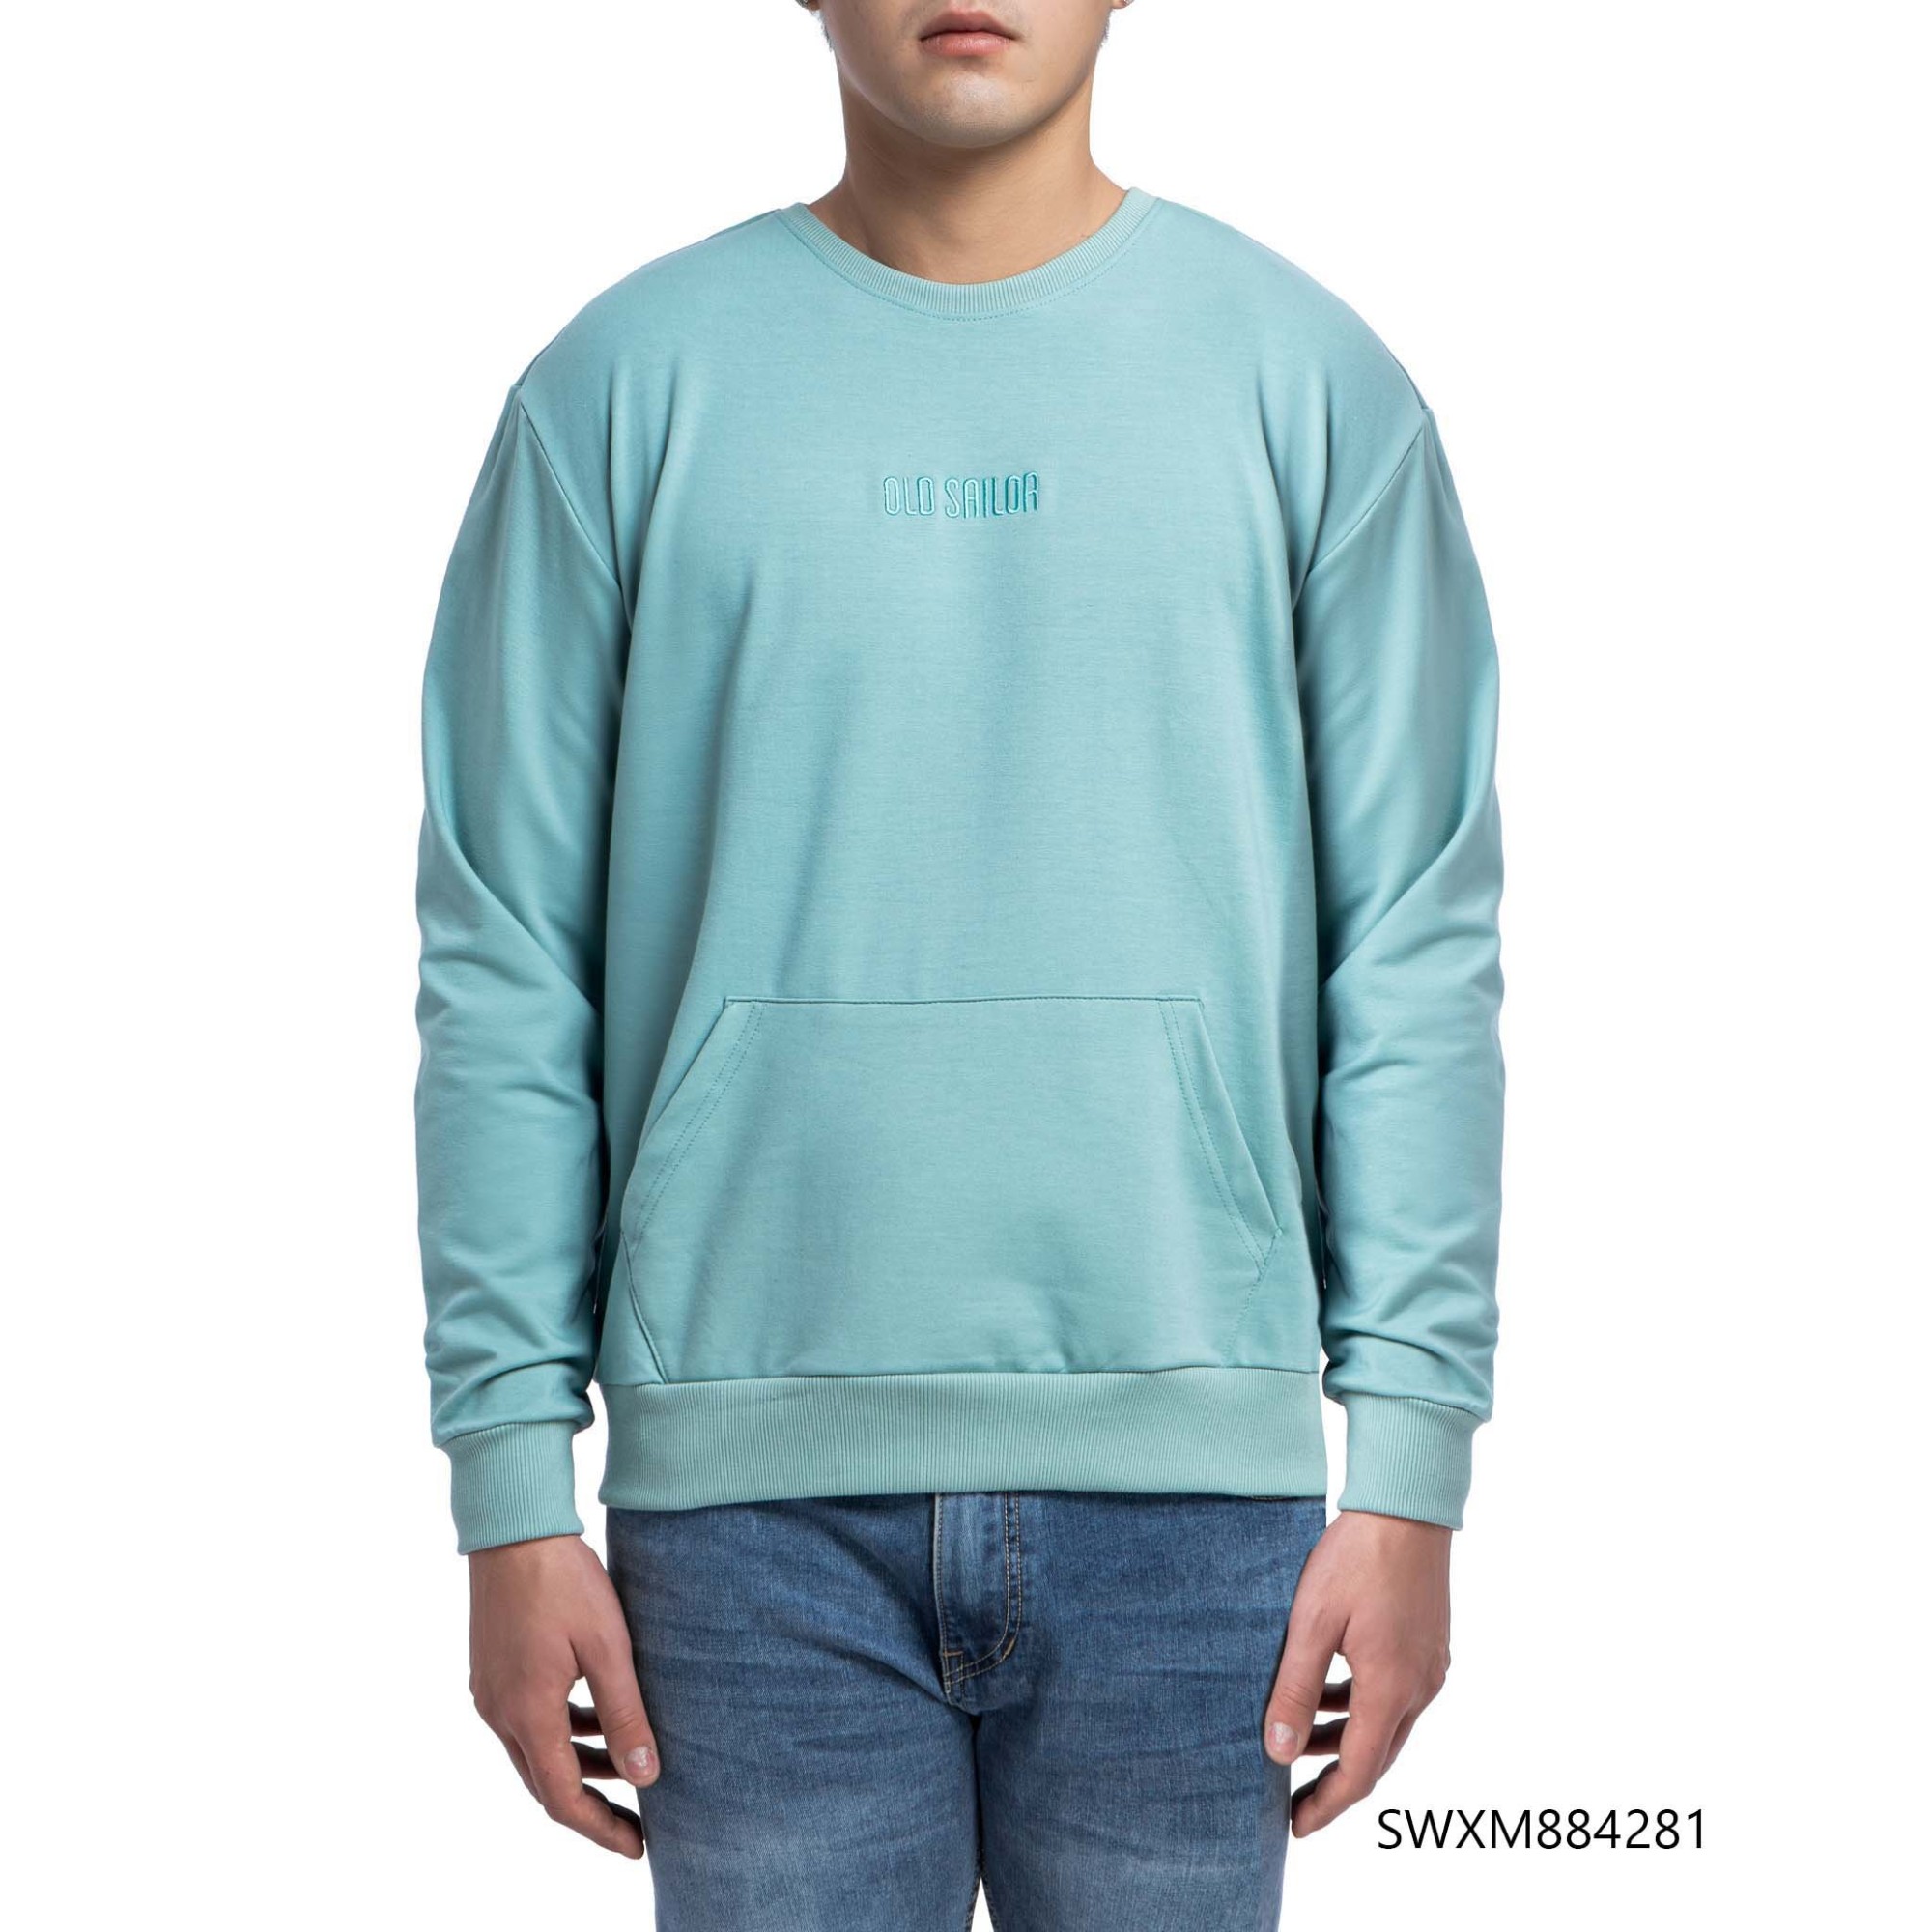 Áo Voyage Sweater Old Sailor - LONG SLEEVED TEE O.S.L - BISCAY GREEN - SWXM884281-  xanh mint  - big size upto 5XL